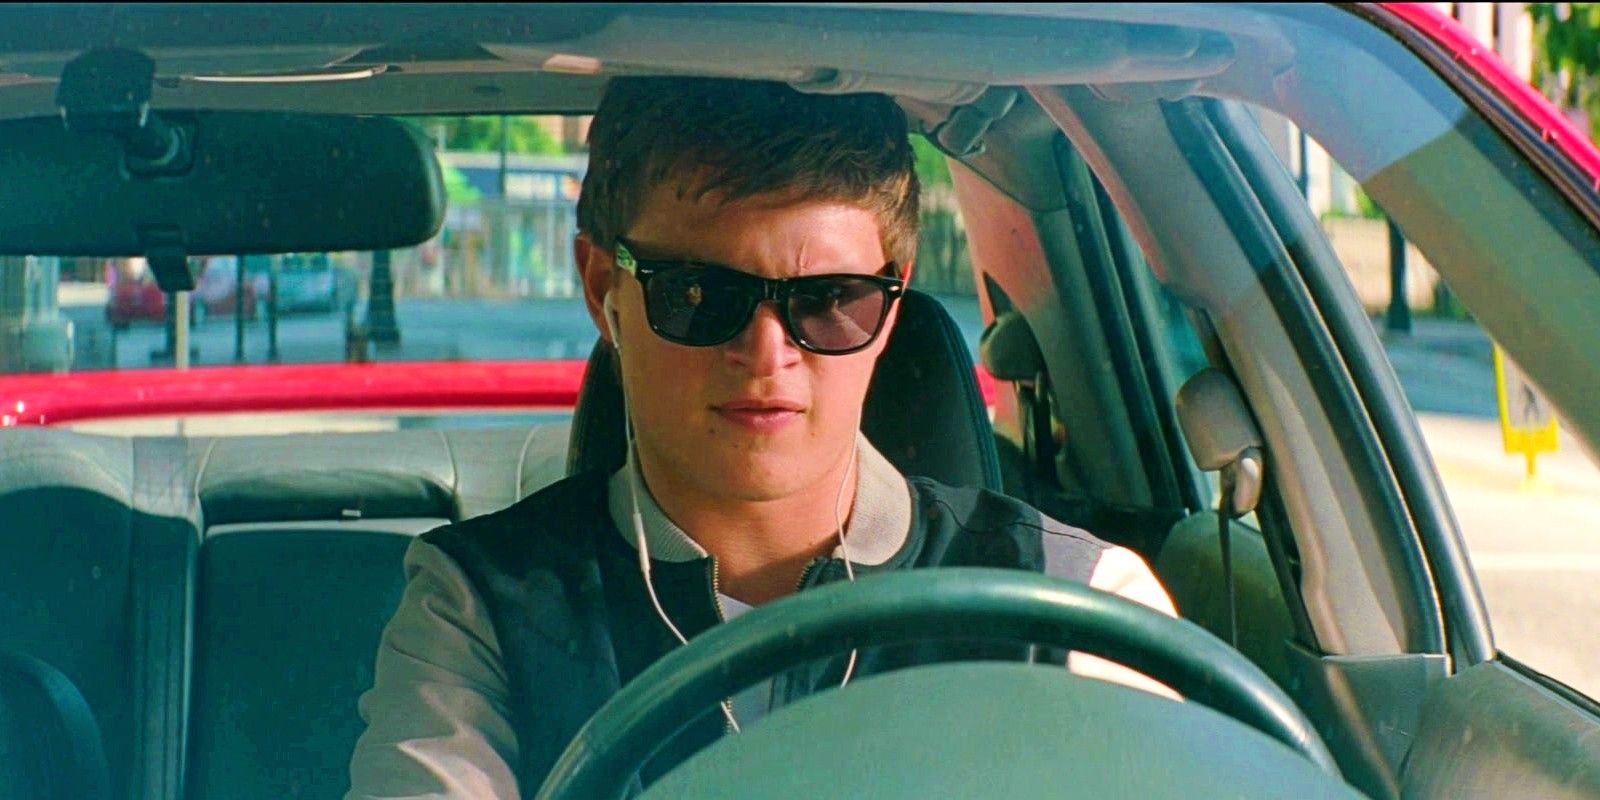 Baby waits in the car in Baby Driver